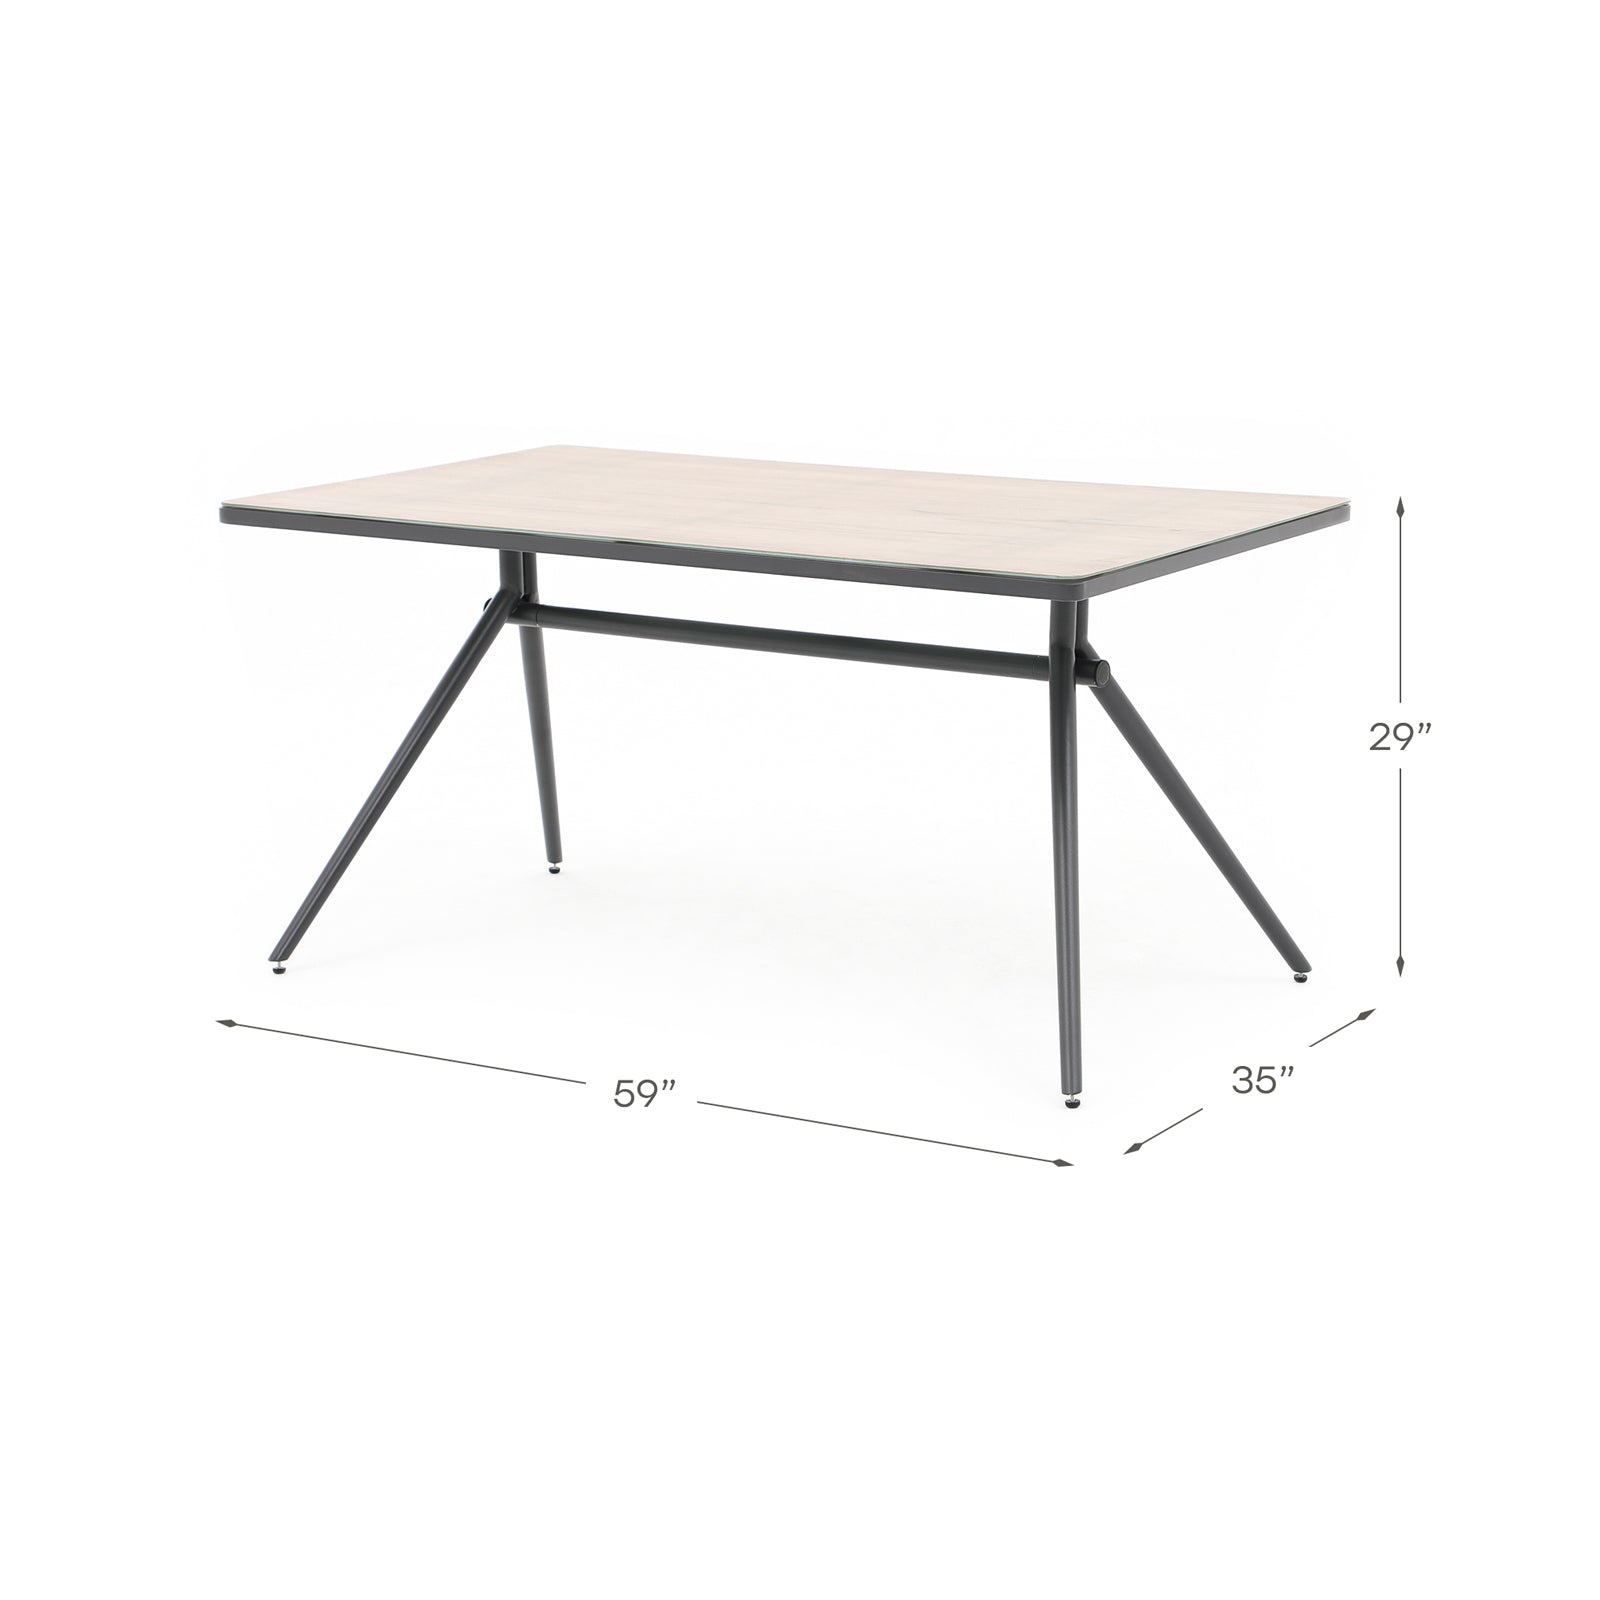 Hallerbos rectangle outdoor Dining Table with steel frame, resin ceramic glass top, dimension - Jardina Furniture